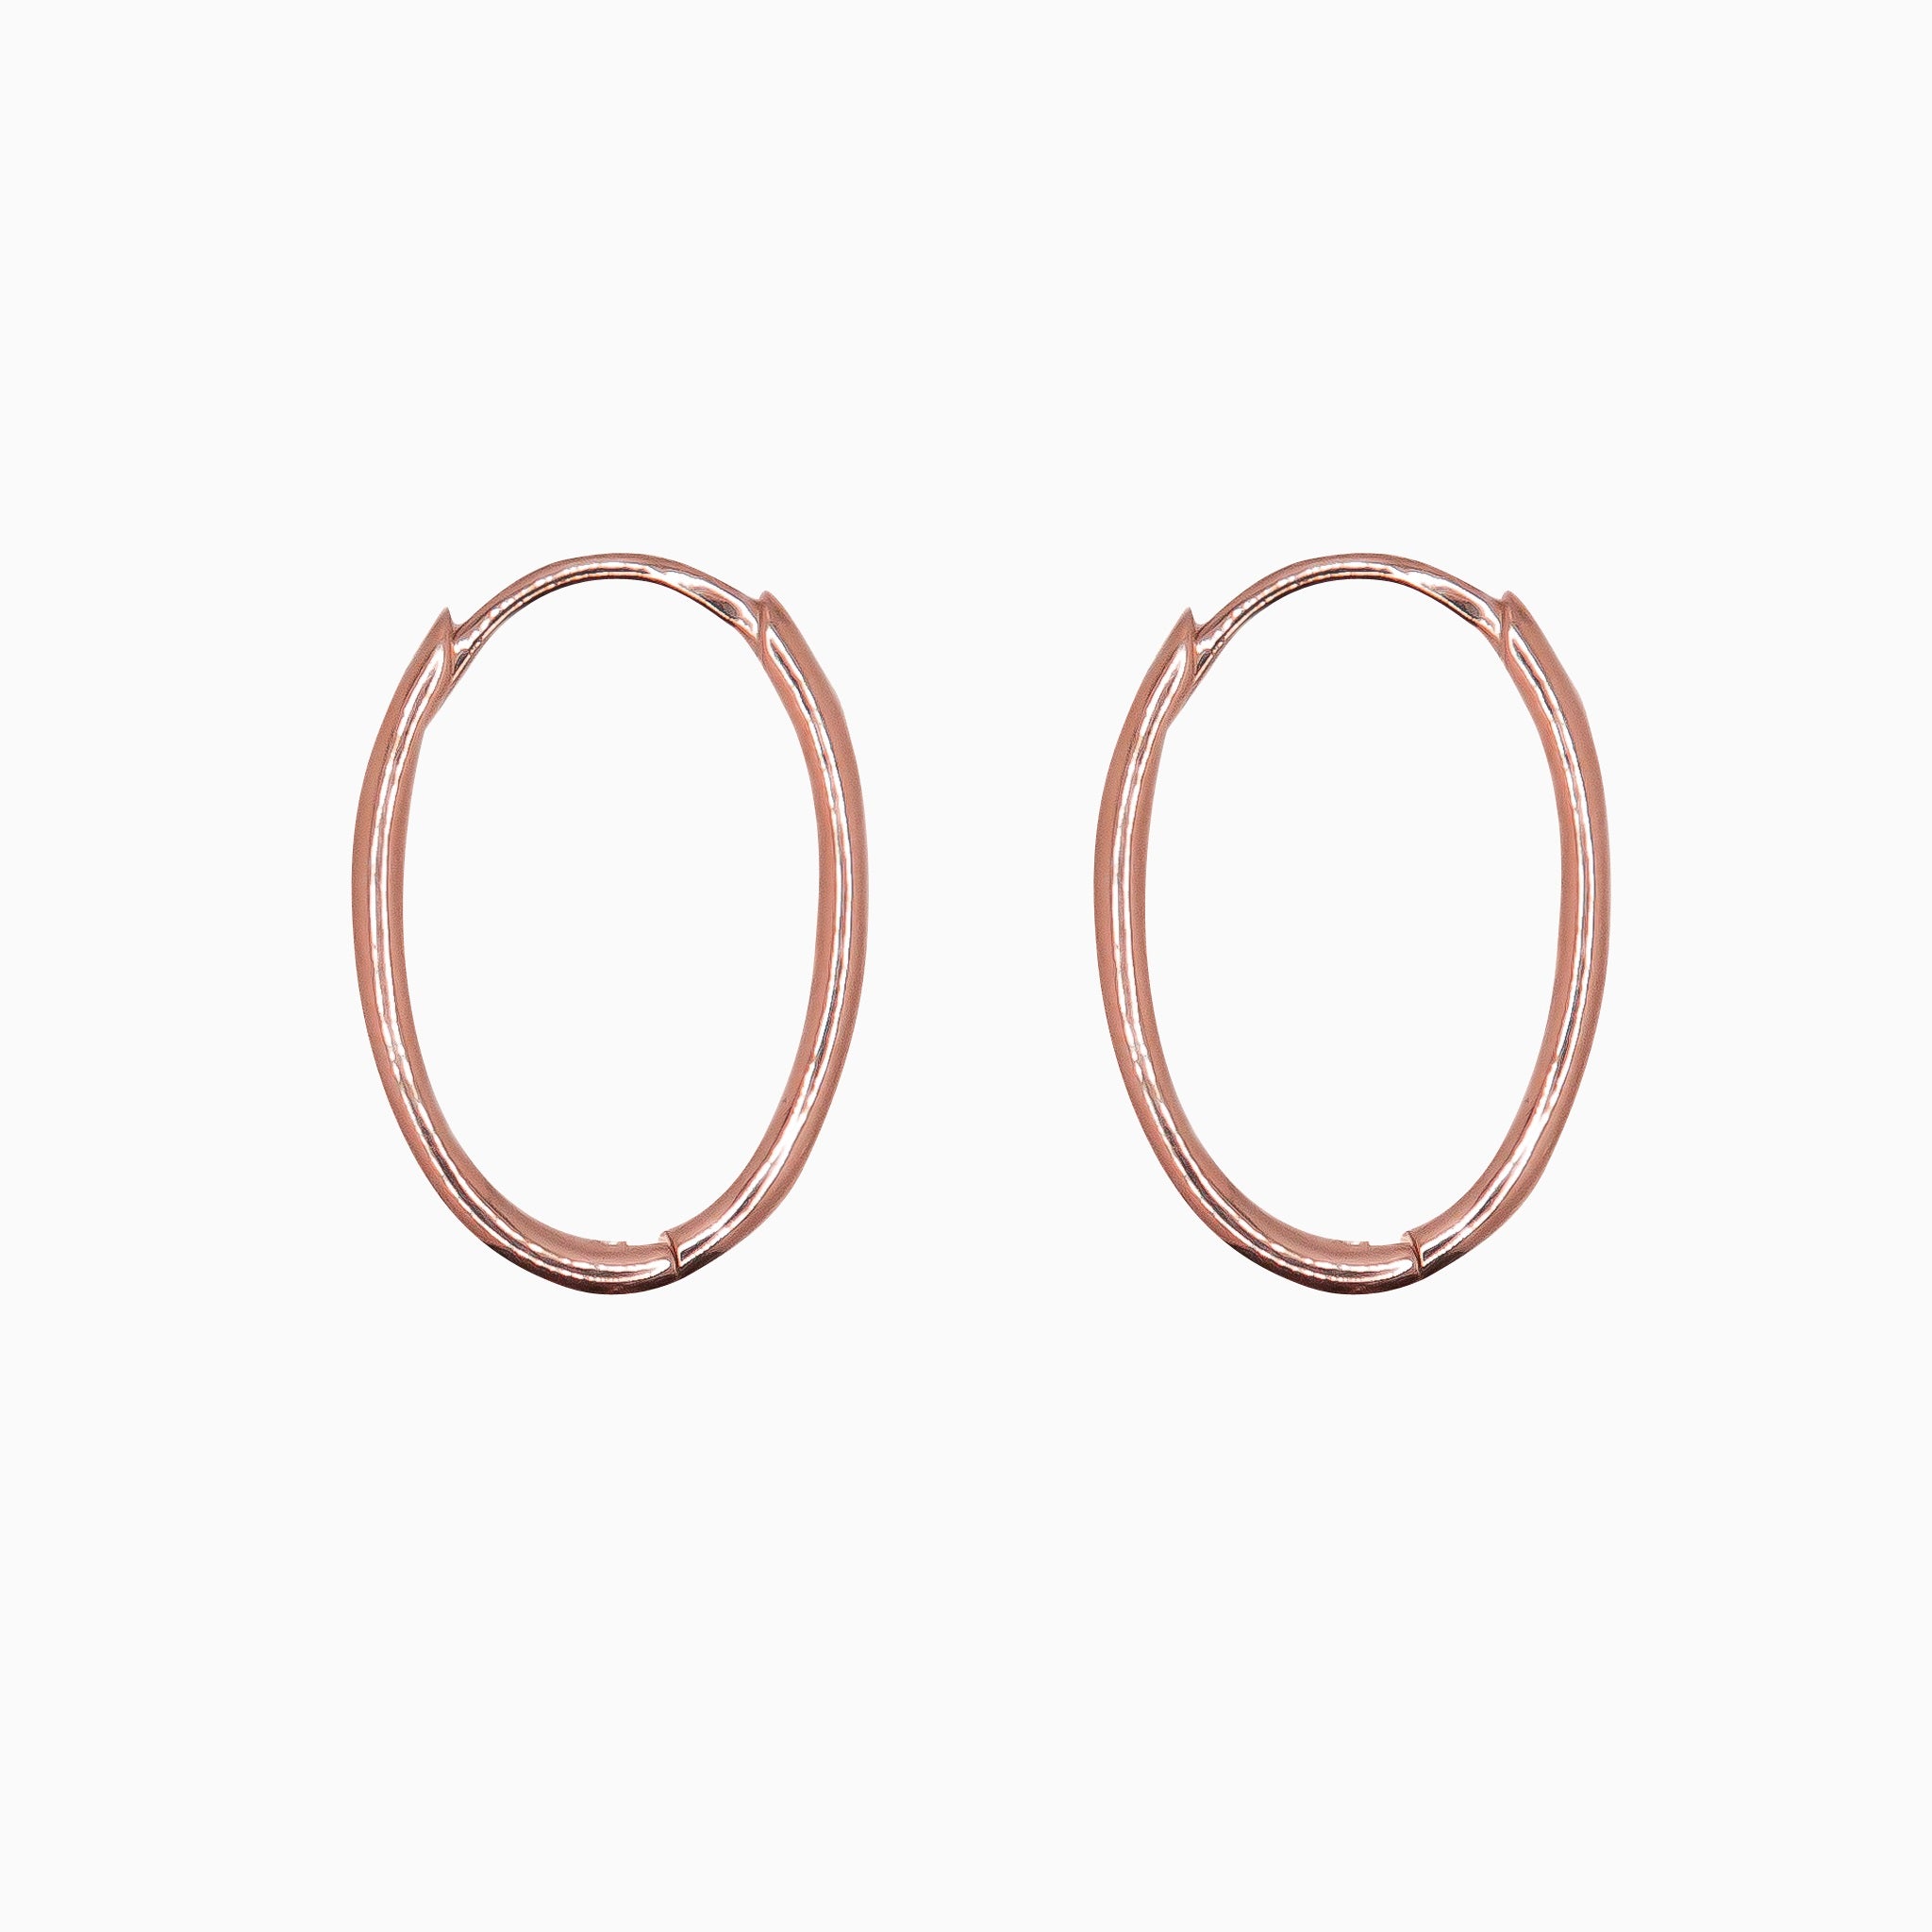 14k Rose Gold 13mm x 9mm Hinged Everyday Oval Solid Hoop Earrings, Side View